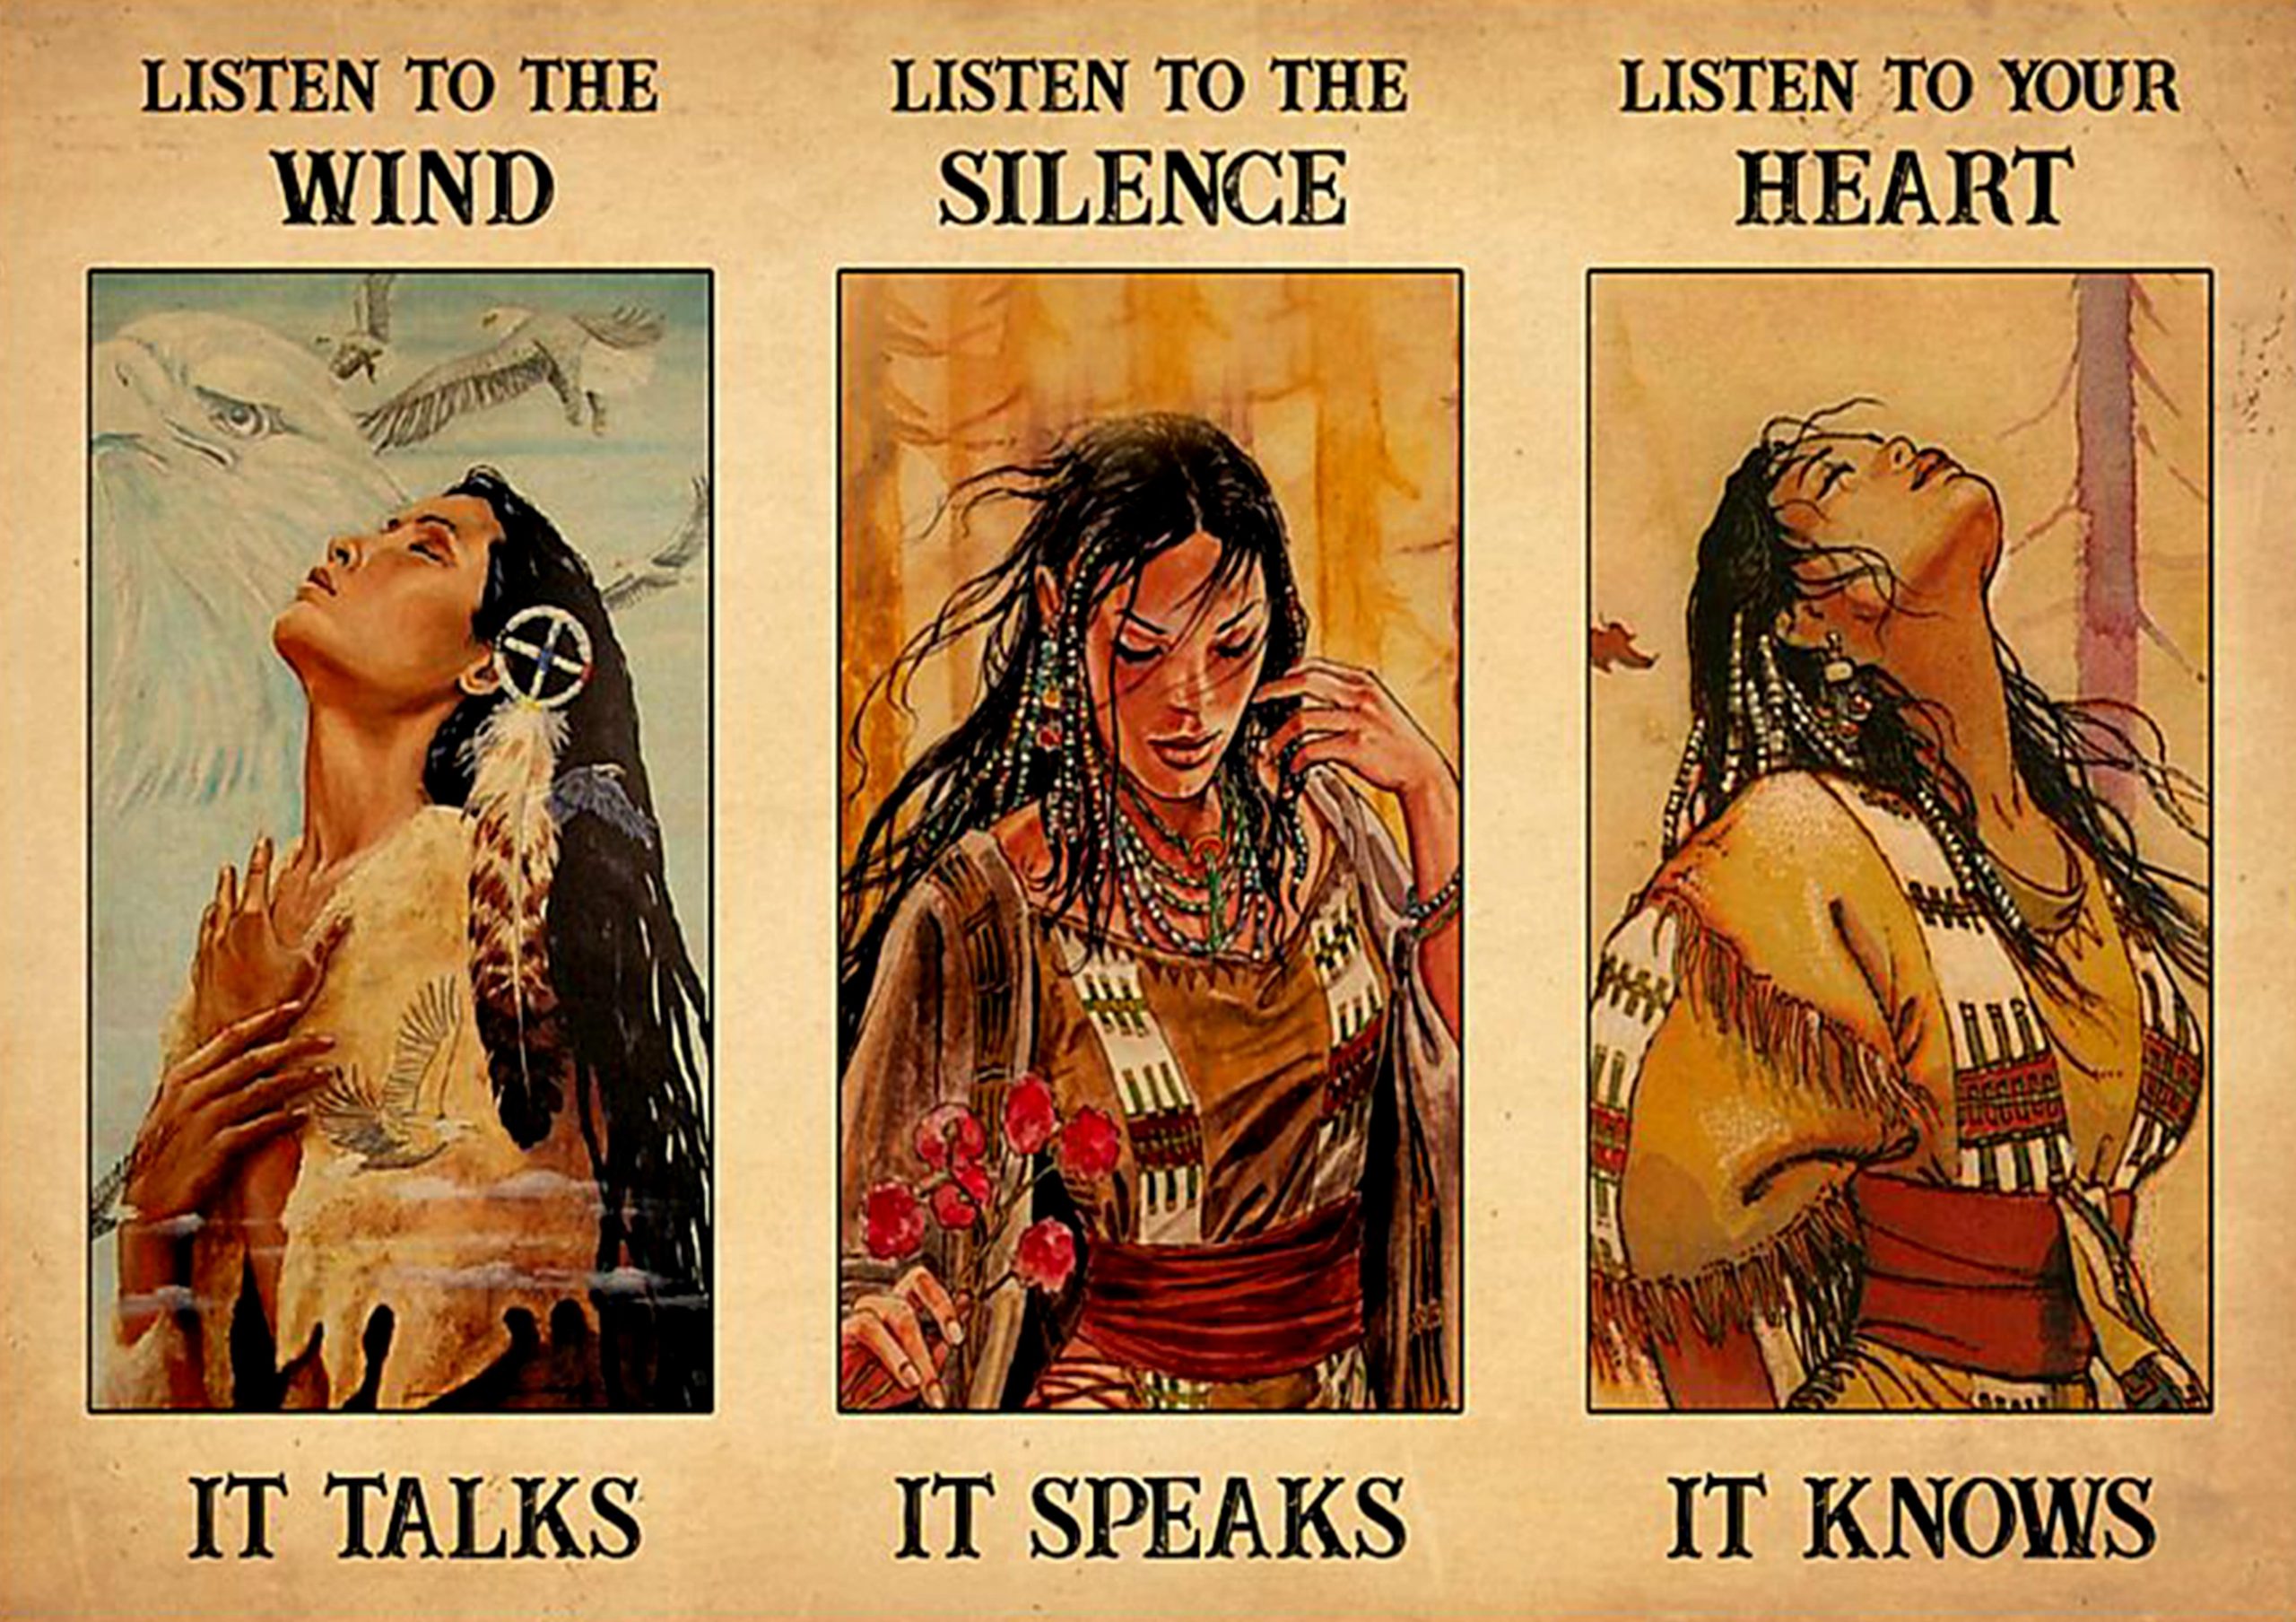 vintage native american girls listen to the wind it talks listen to the silence it speaks poster 1 - Copy